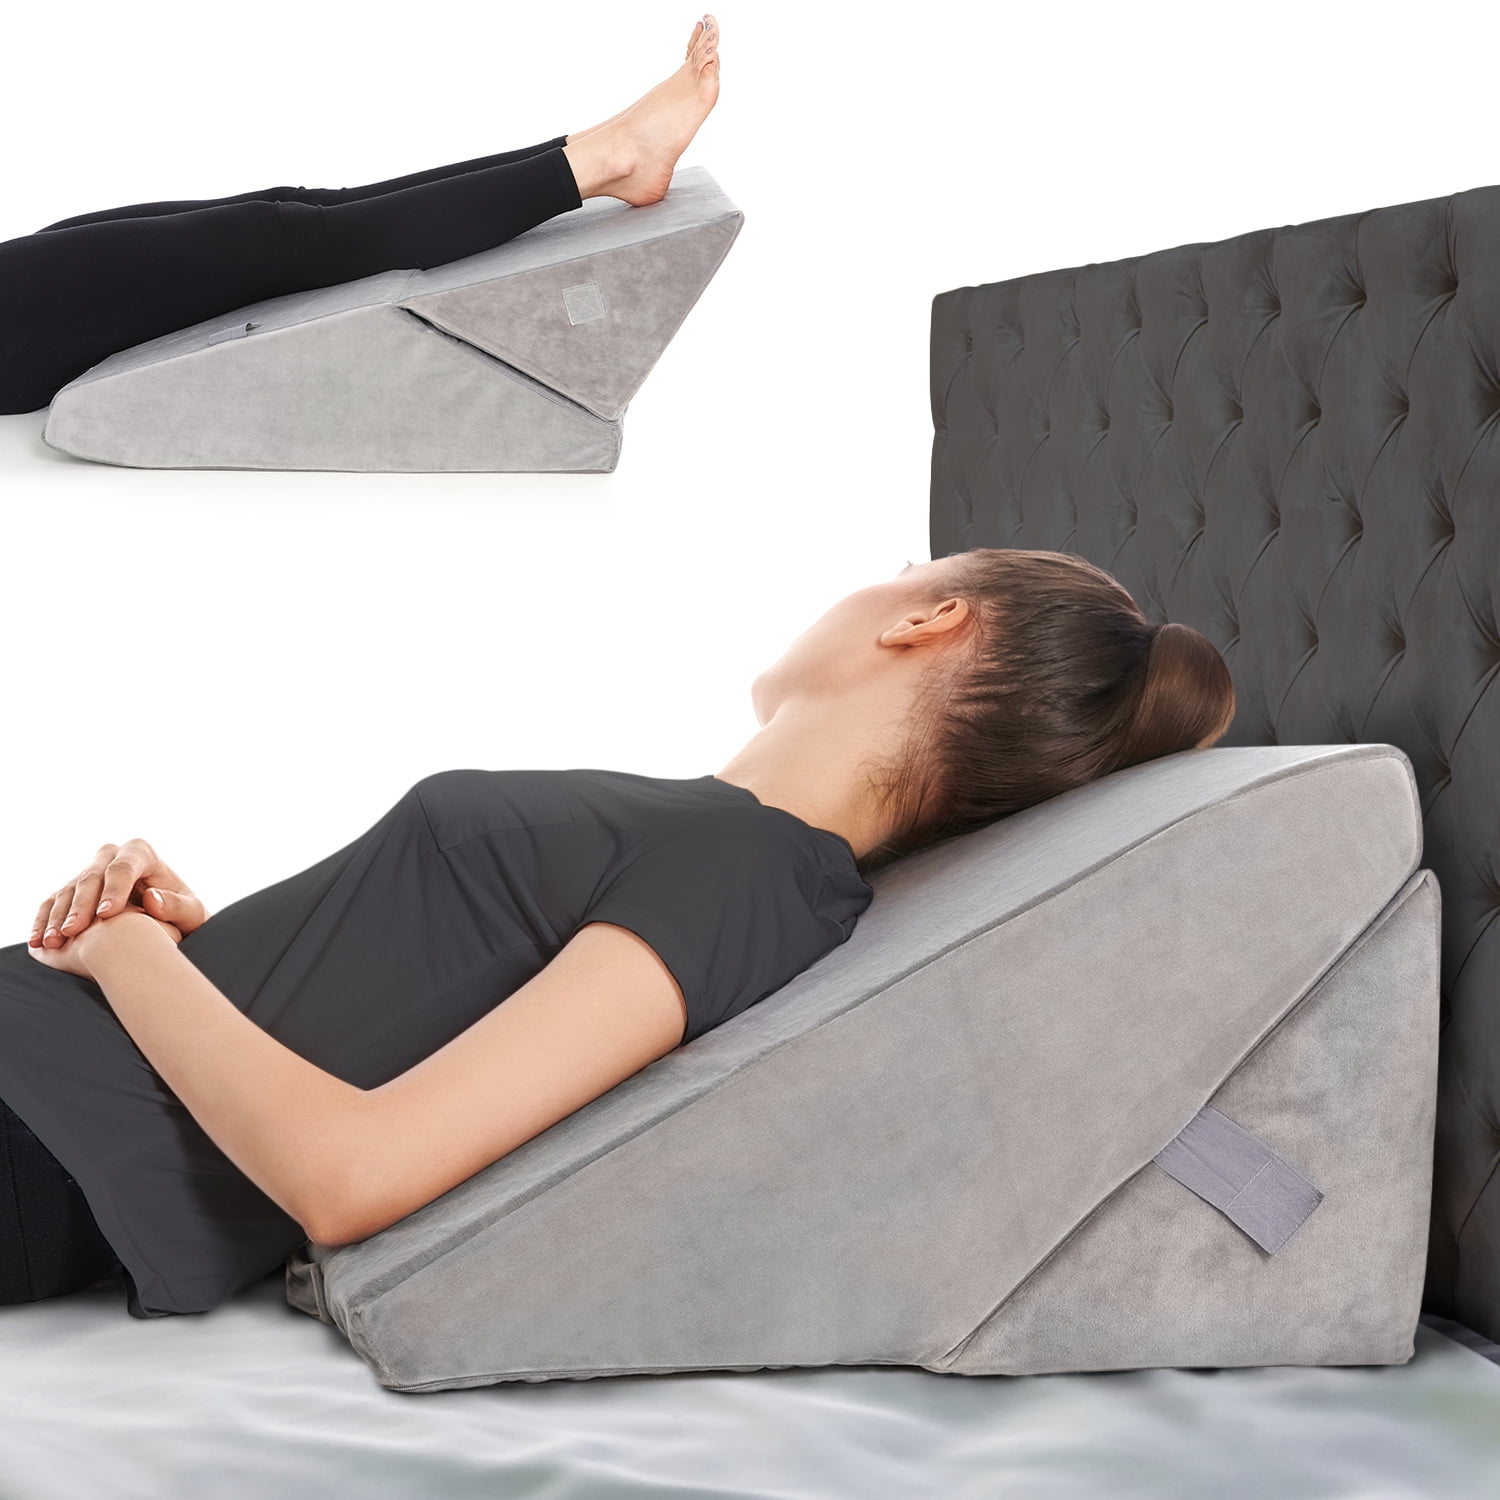 Back Support Systems Sleeping Wedge, Premium Memory Foam, Helps